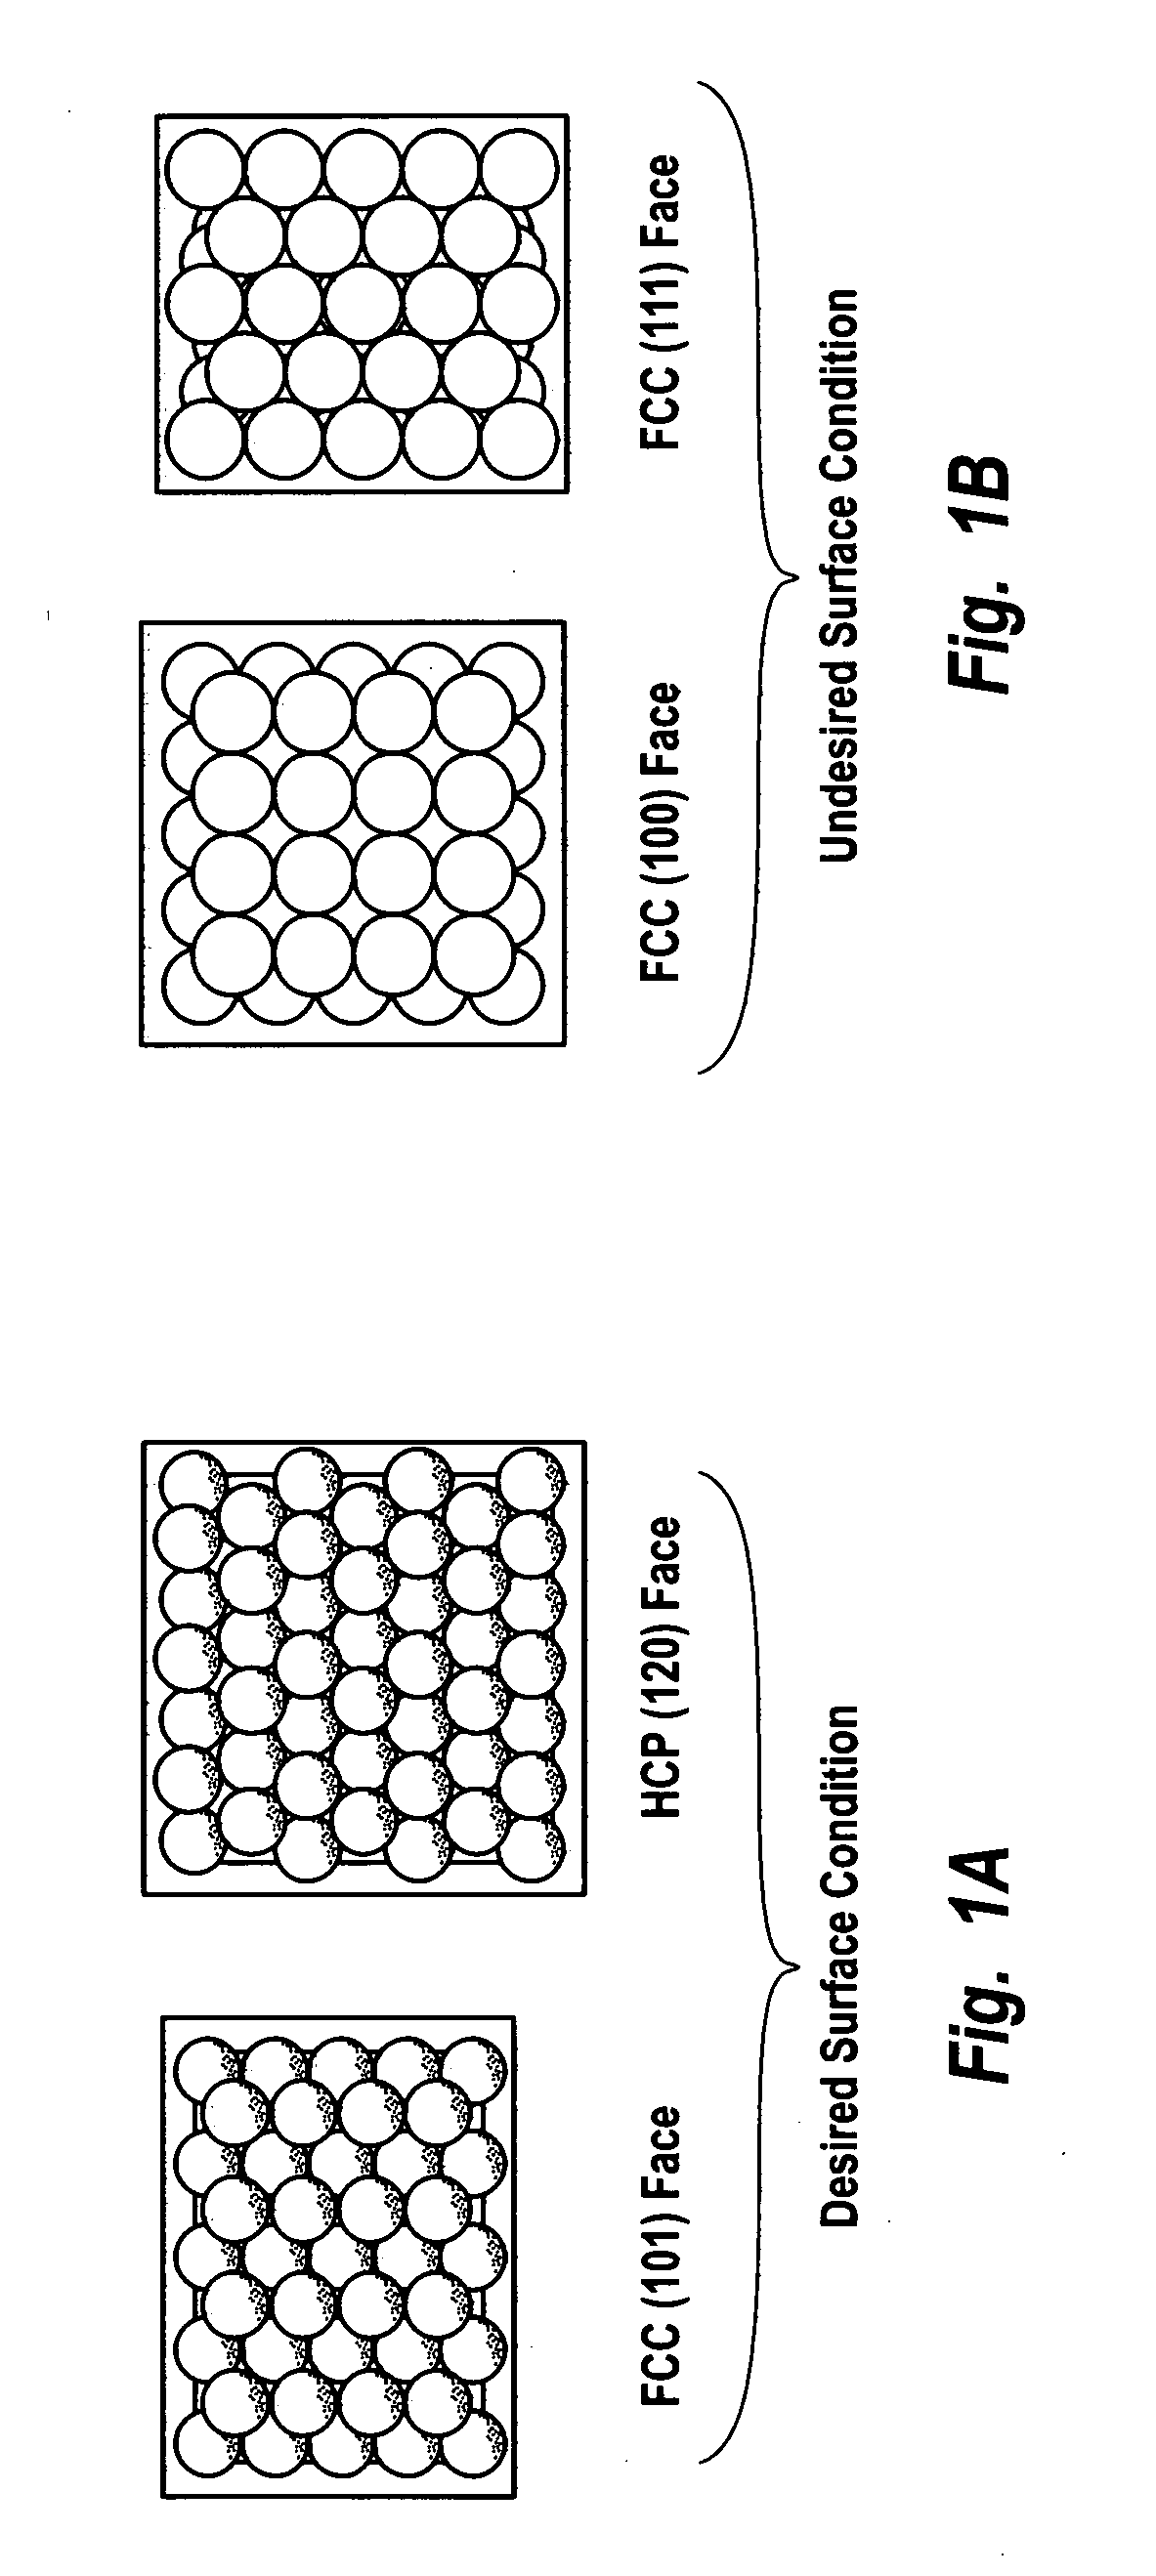 Intermediate precursor compositions used to make supported catalysts having a controlled coordination structure and methods for preparing such compositions